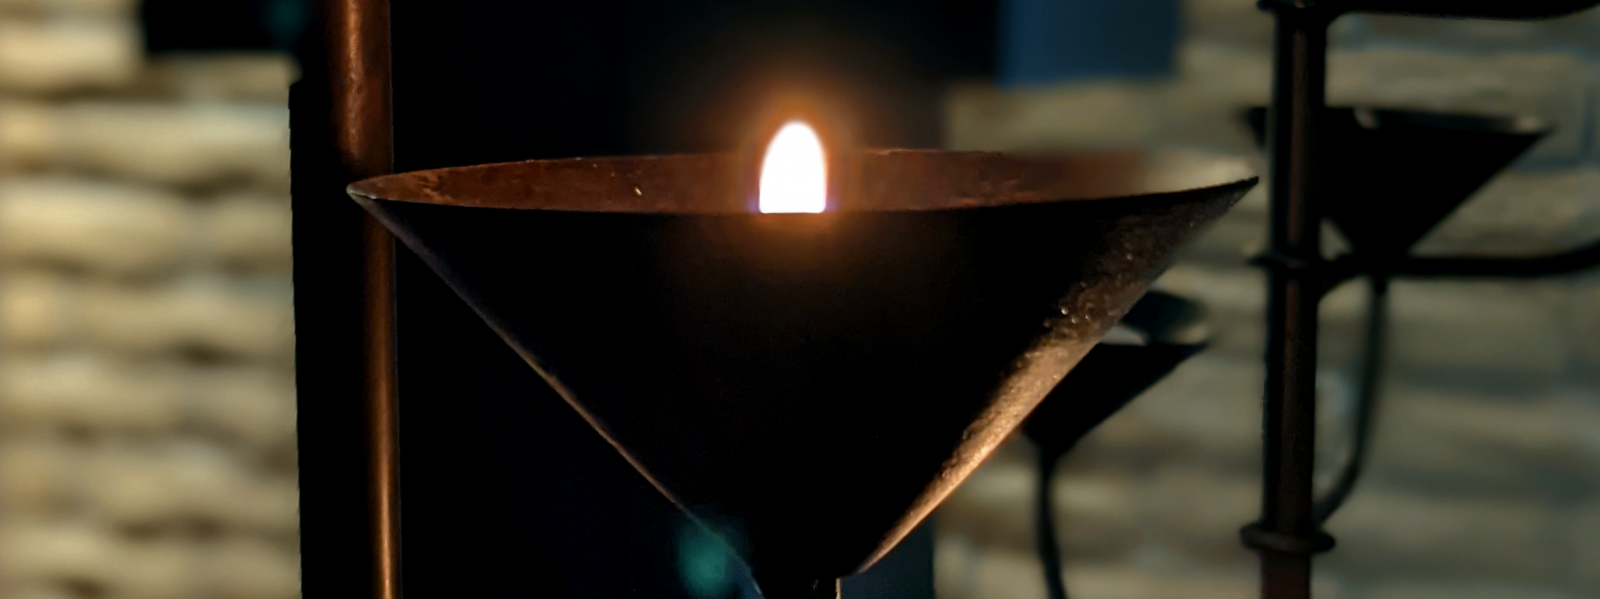 Picture of lit candle in an inverted cone-shaped metal holder. Room is dark.